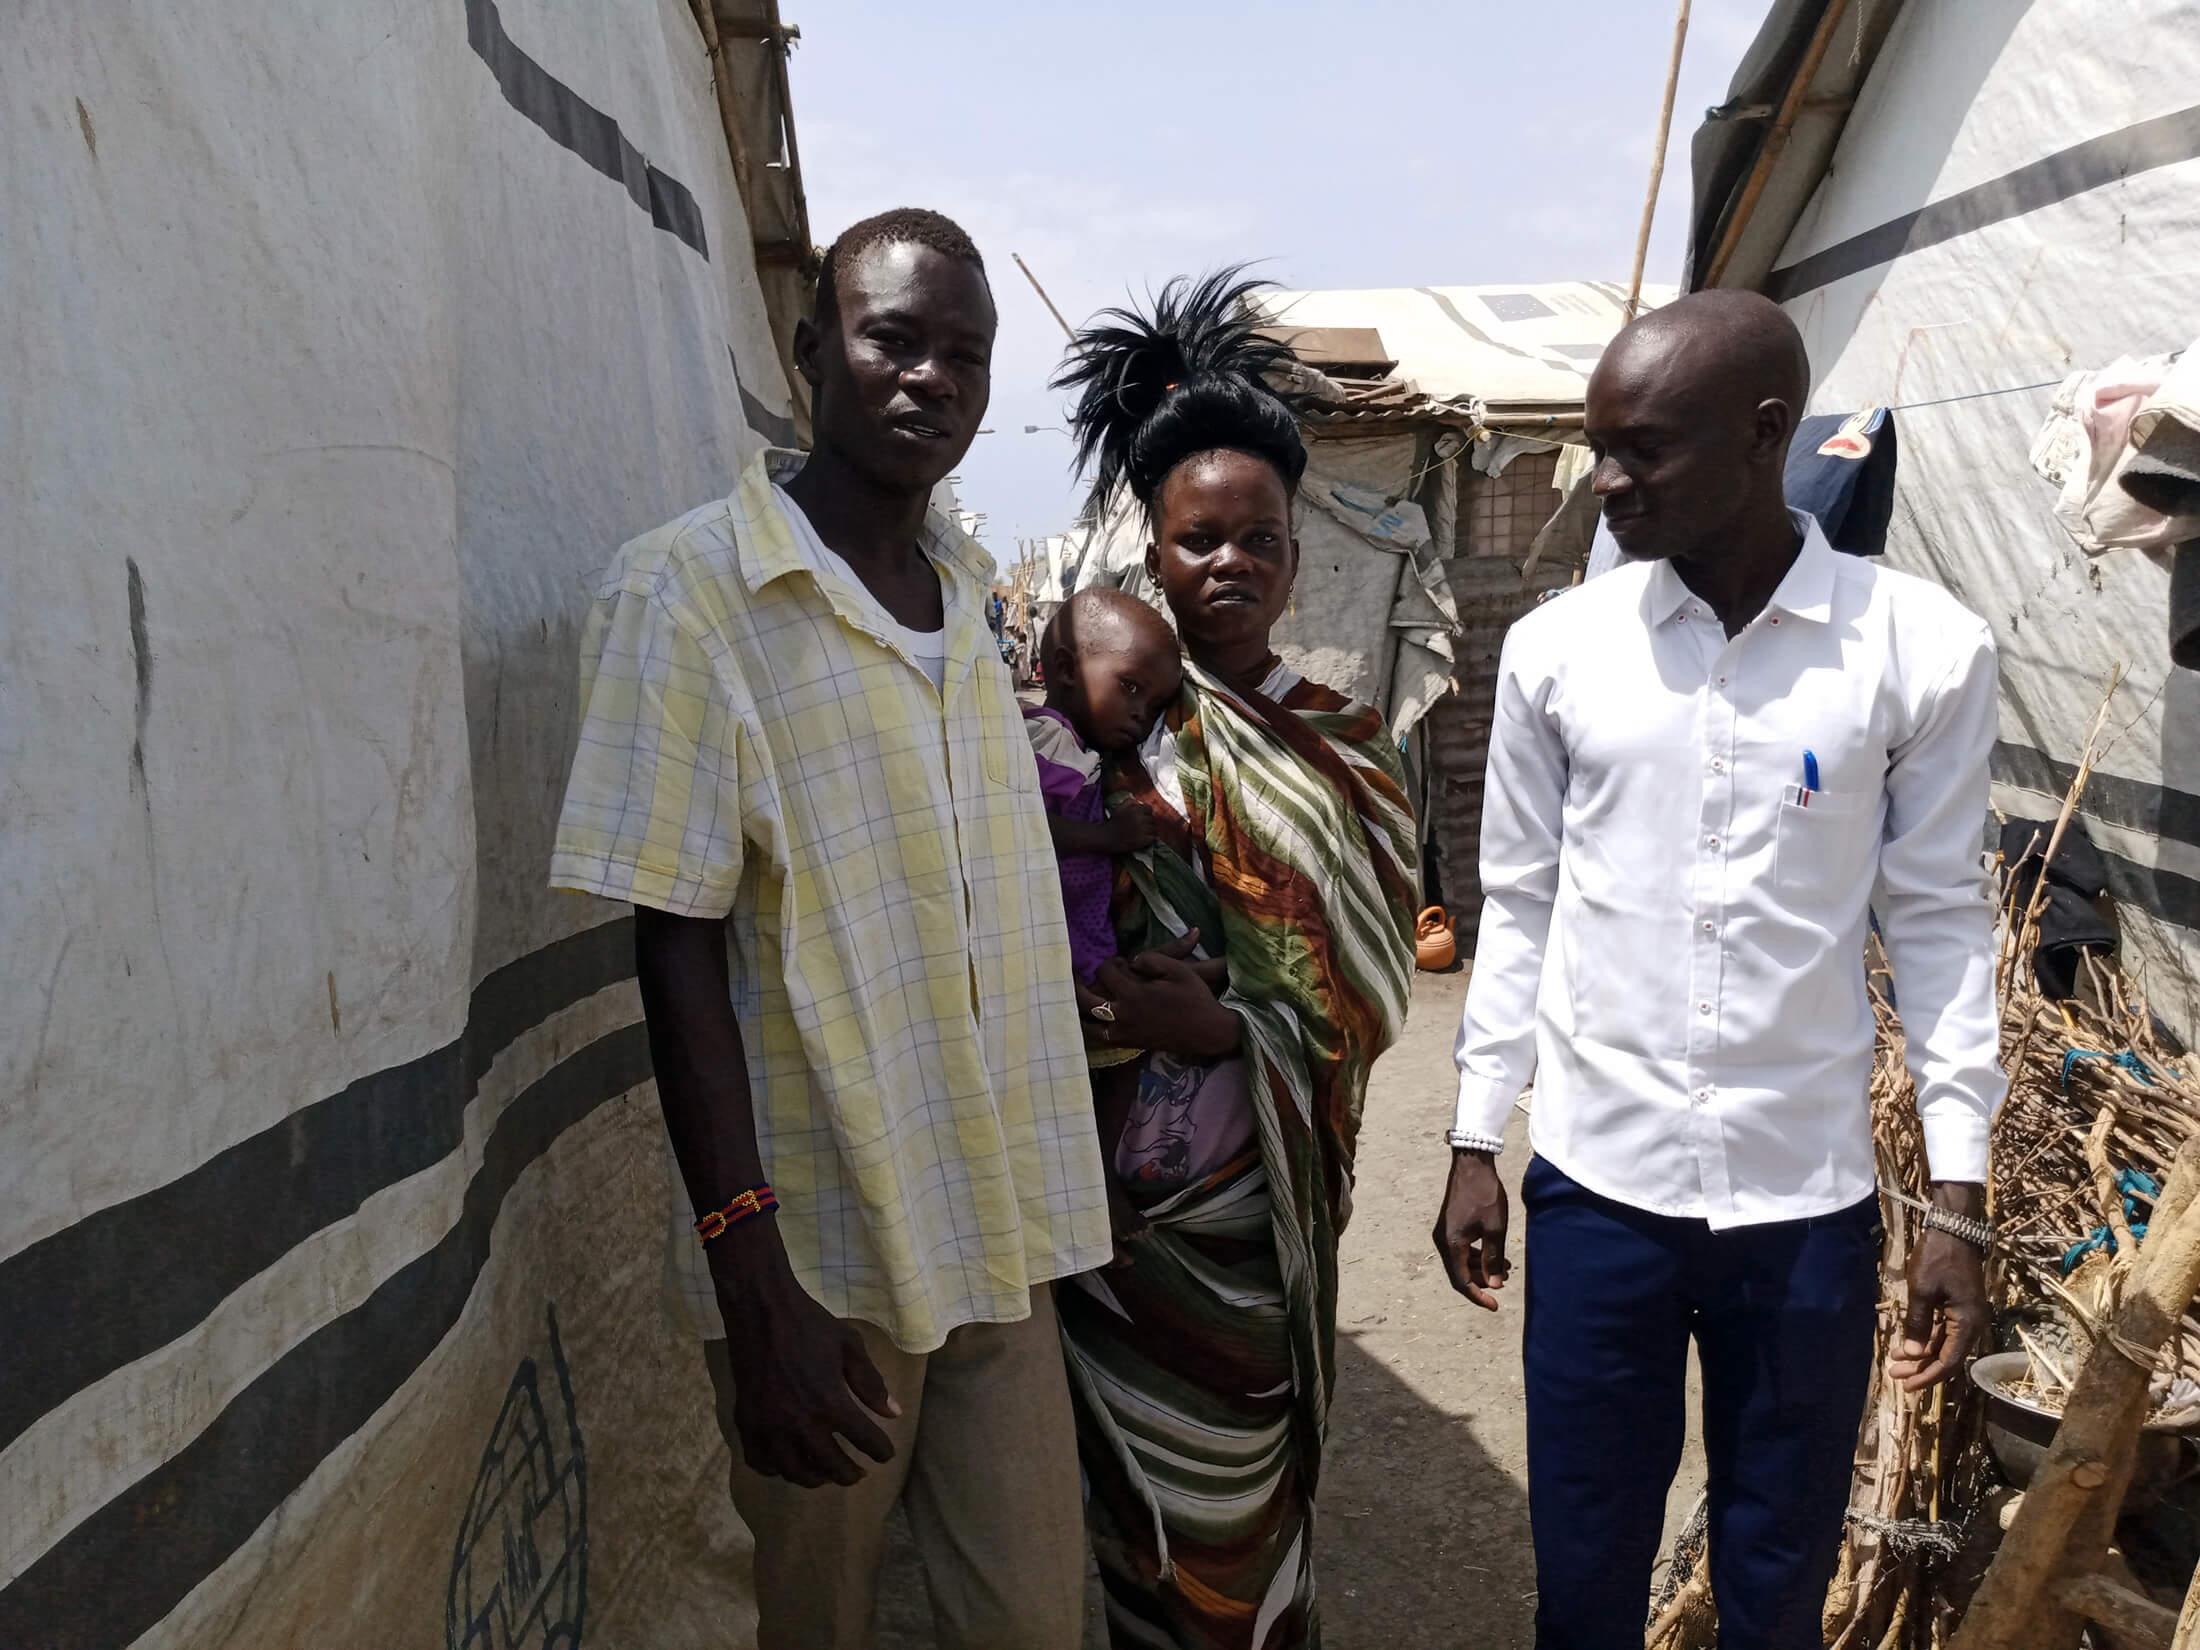 Phillip (left) stands with his wife, child and Duku Evans Chaplain in the Malakal PoC site.